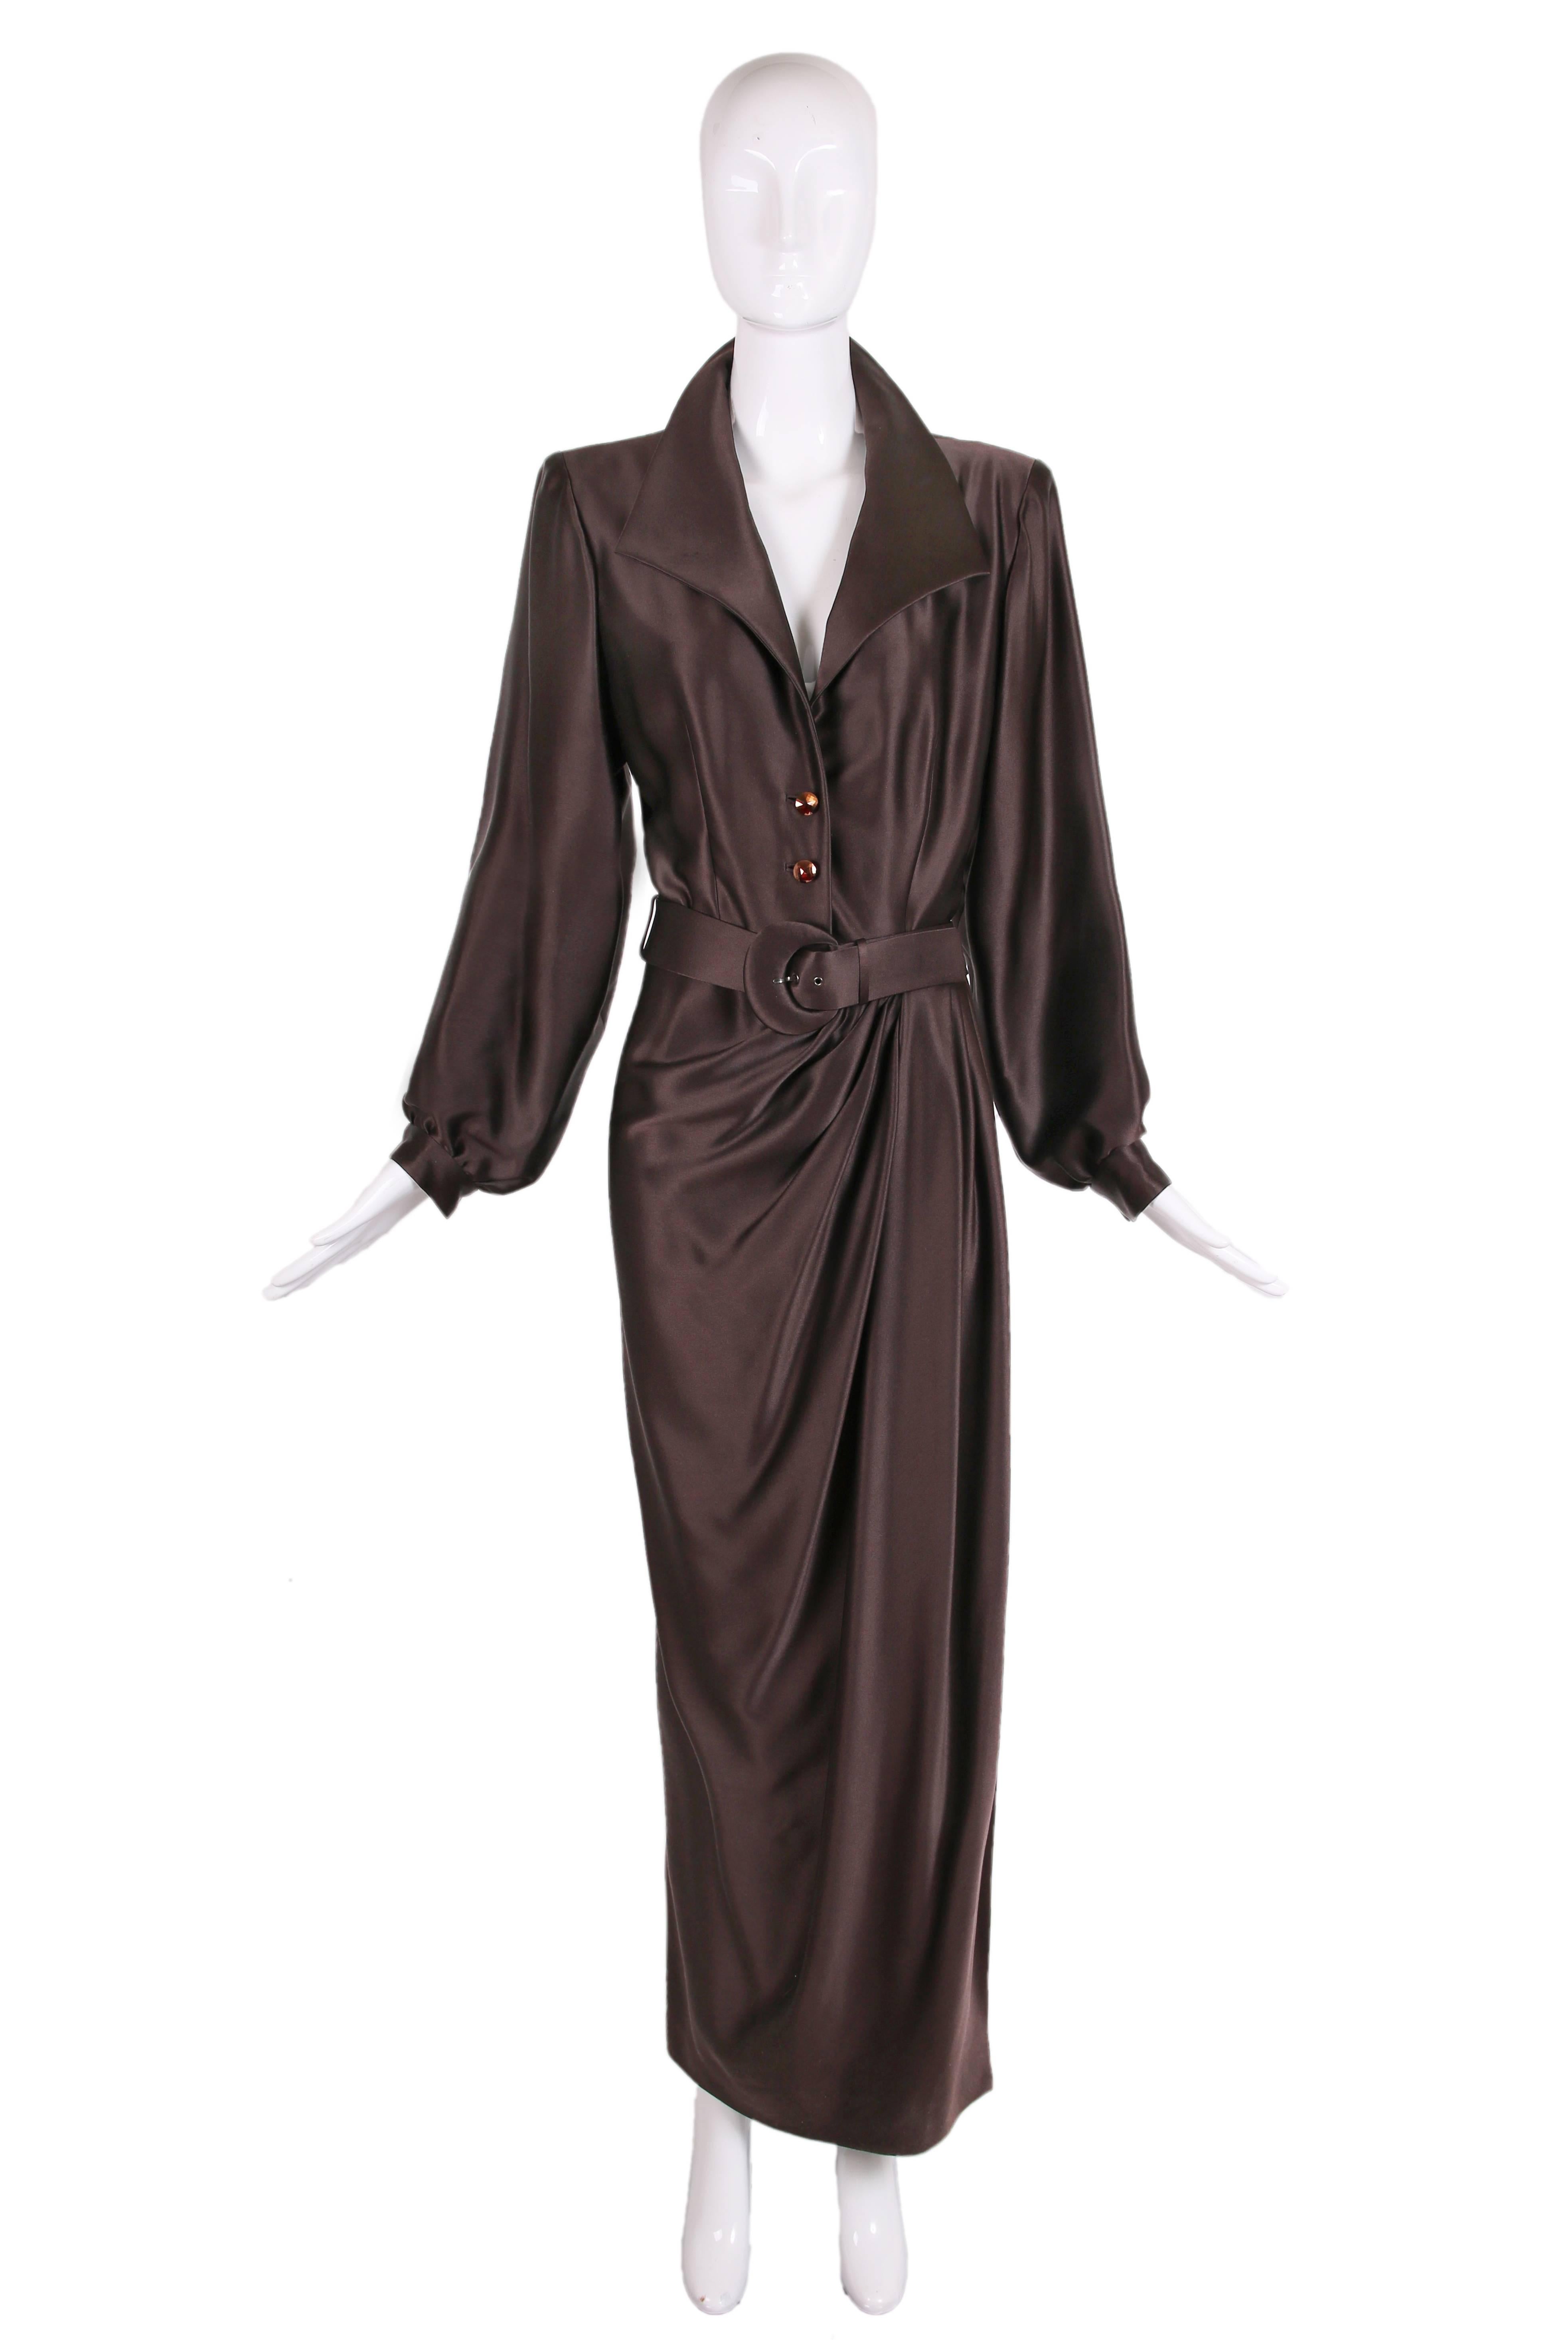 1989 Yves Saint Laurent haute couture brown silk collared evening gown with deep V-neck opening, faceted faux copper button closures at bodice and wrap skirt with gathers that drape diagonally across the skirt. Has shoulder pads which can be